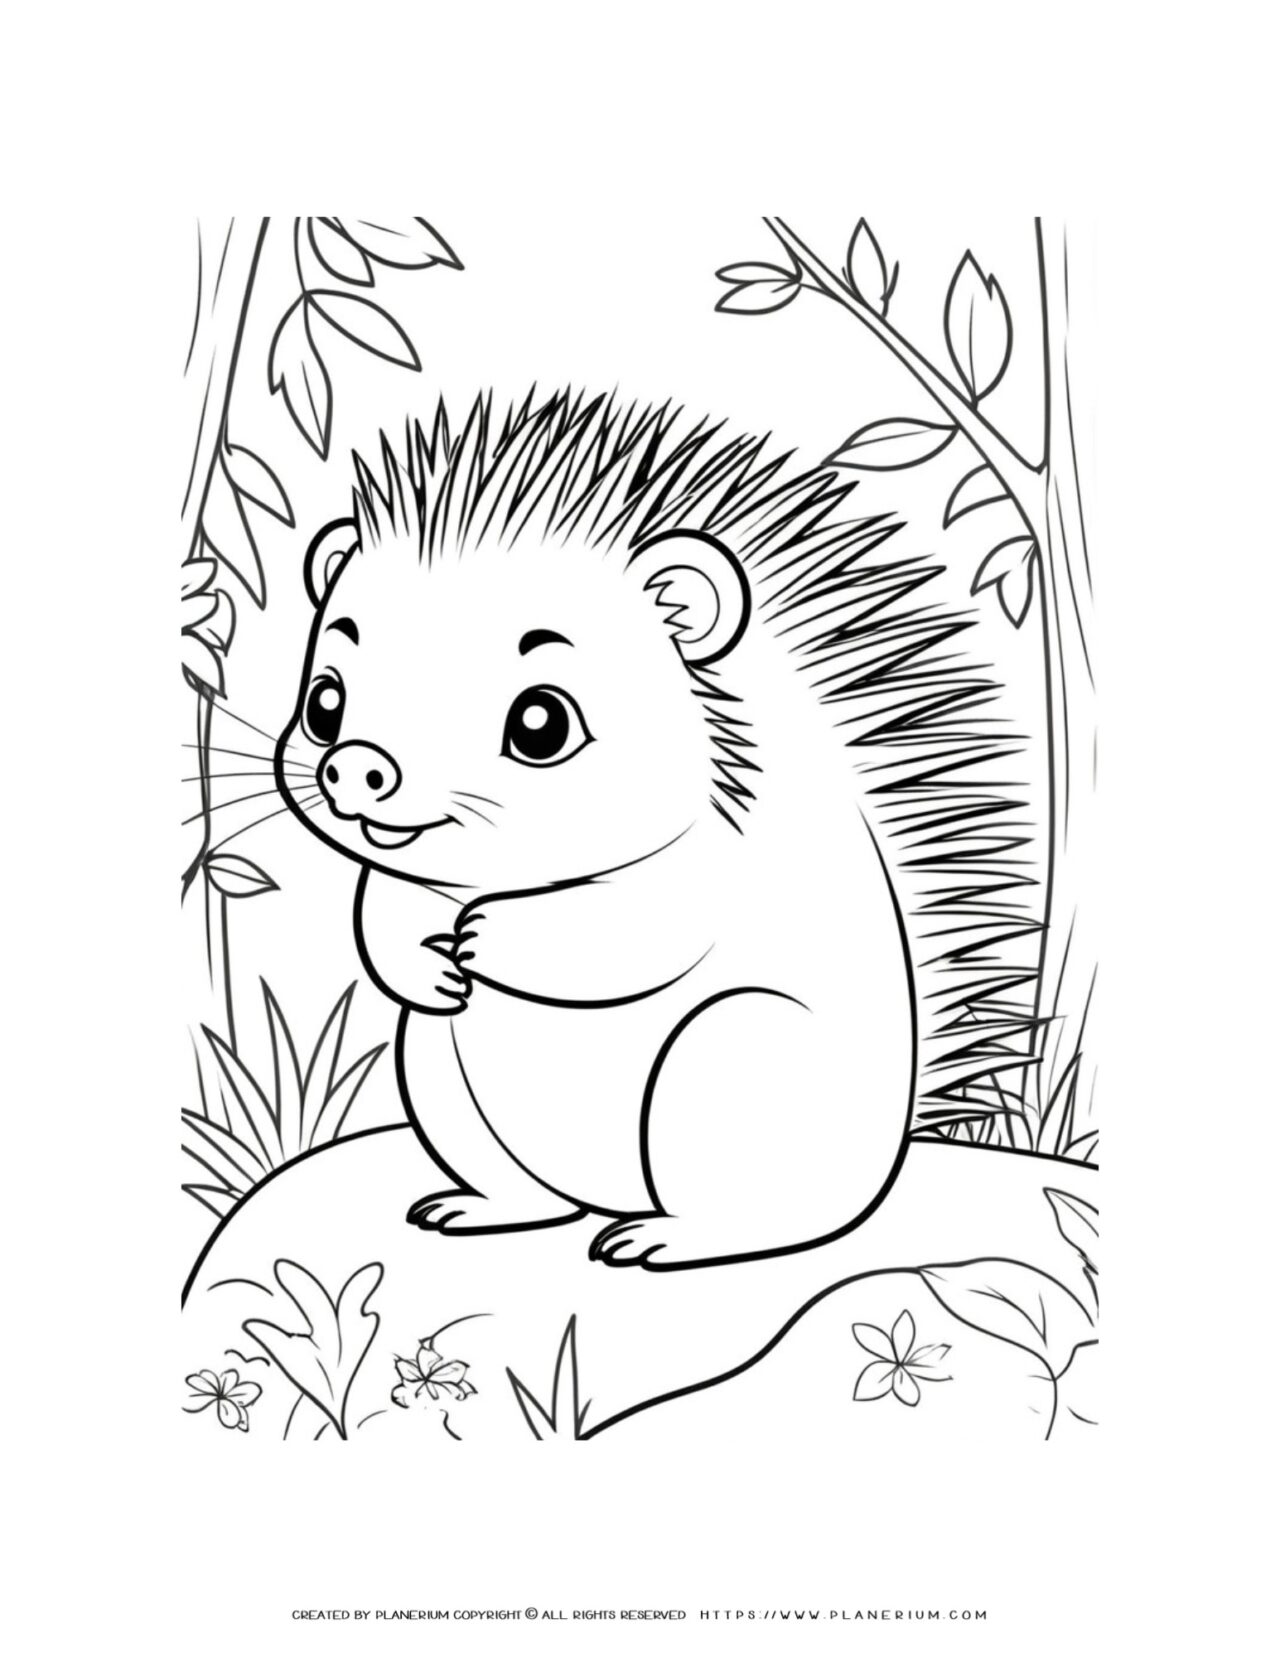 porcupine-in-the-forest-coloring-page